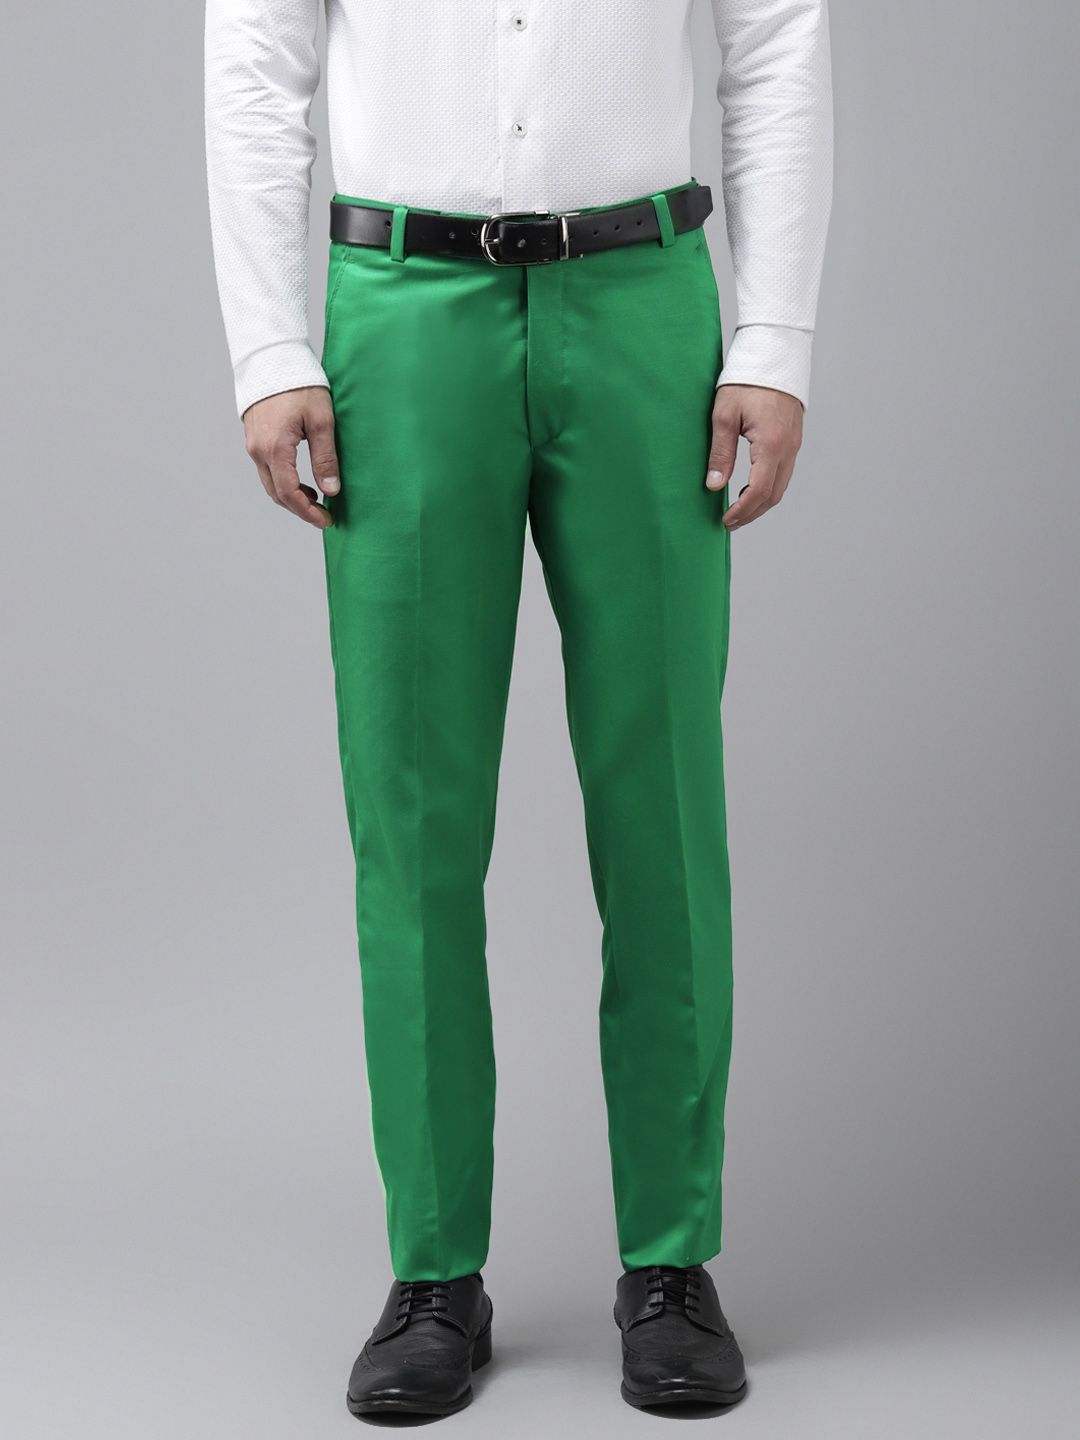 Hangup Brown Regular Fit Trousers  Buy Hangup Brown Regular Fit Trousers  Online at Best Prices in India on Snapdeal